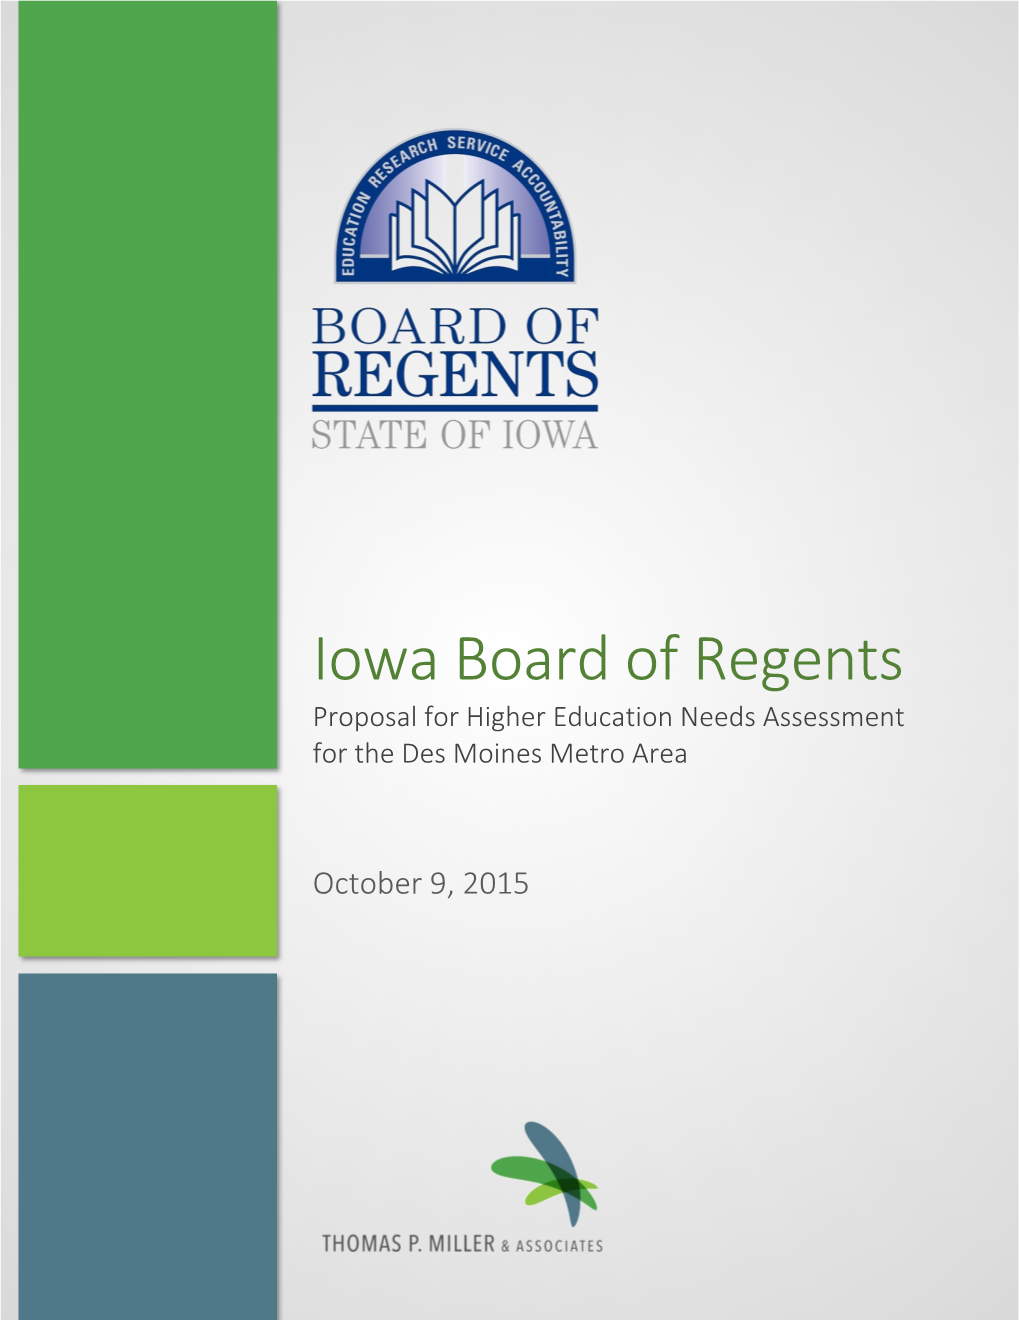 Iowa Board of Regents Proposal for Higher Education Needs Assessment for the Des Moines Metro Area